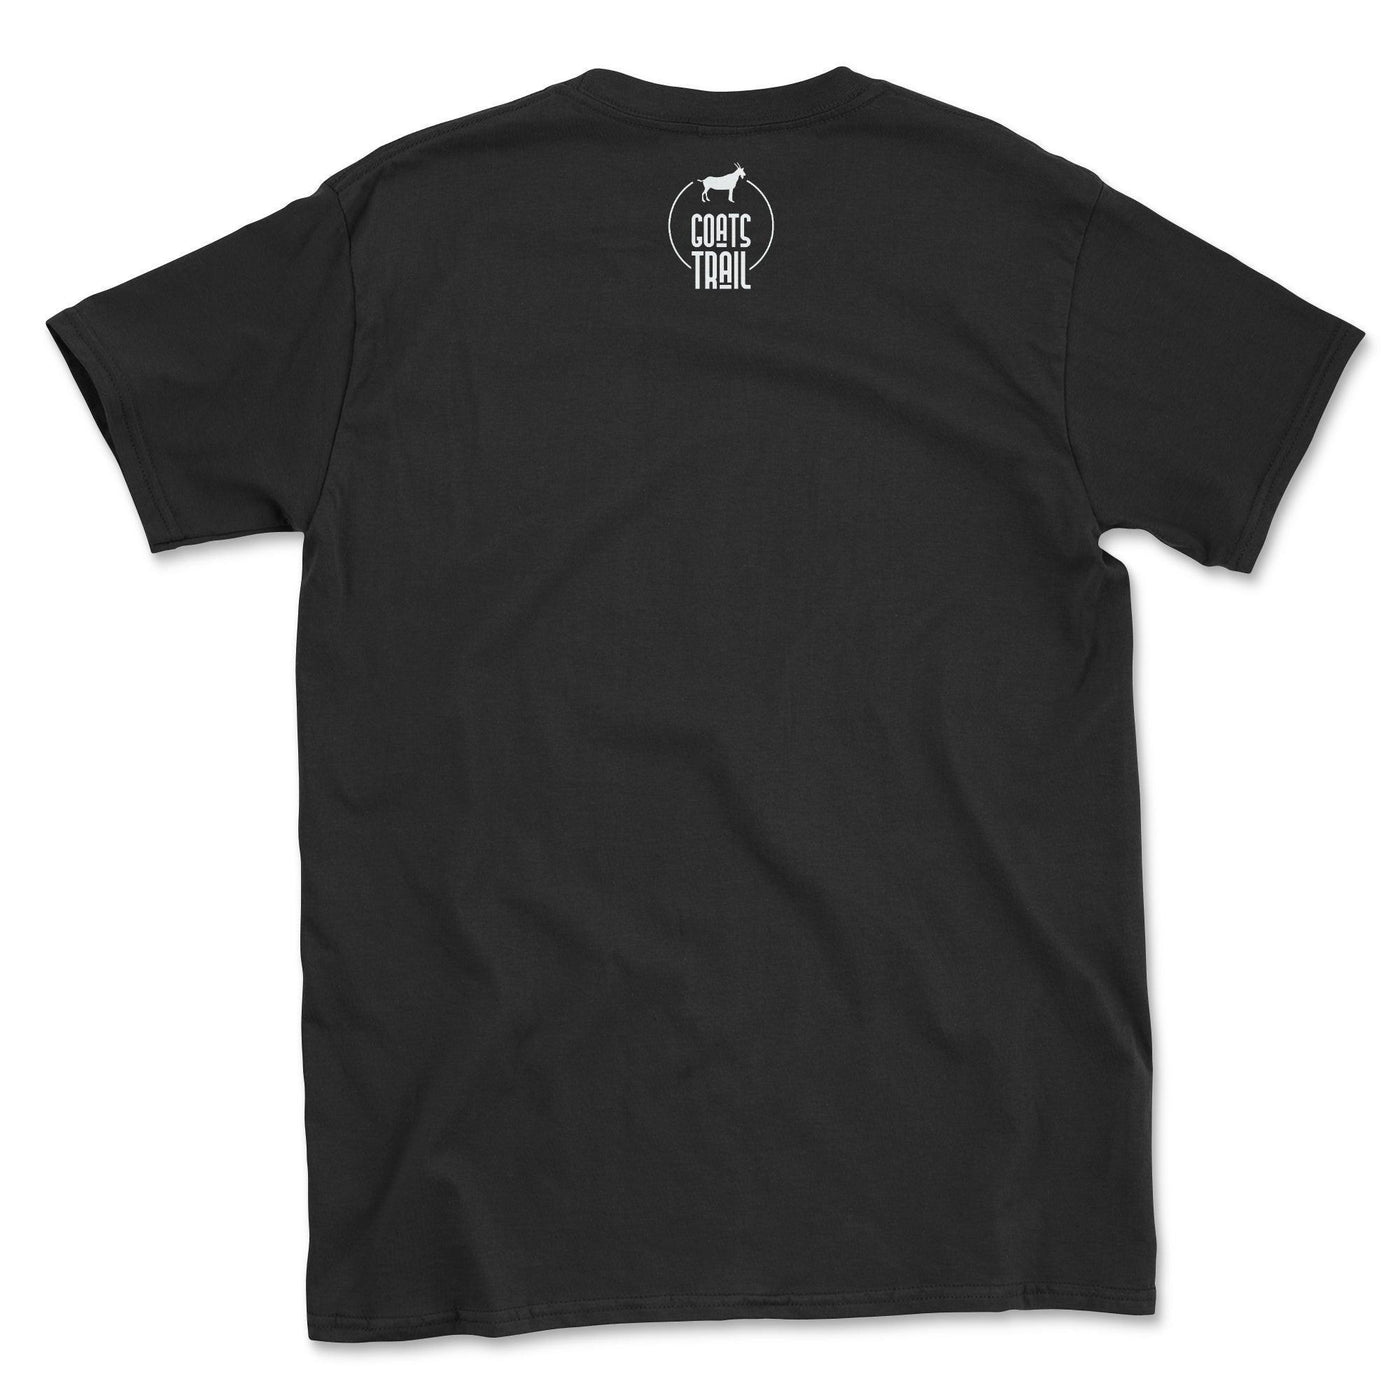 Master of the Campfire Graphic Tee - Goats Trail